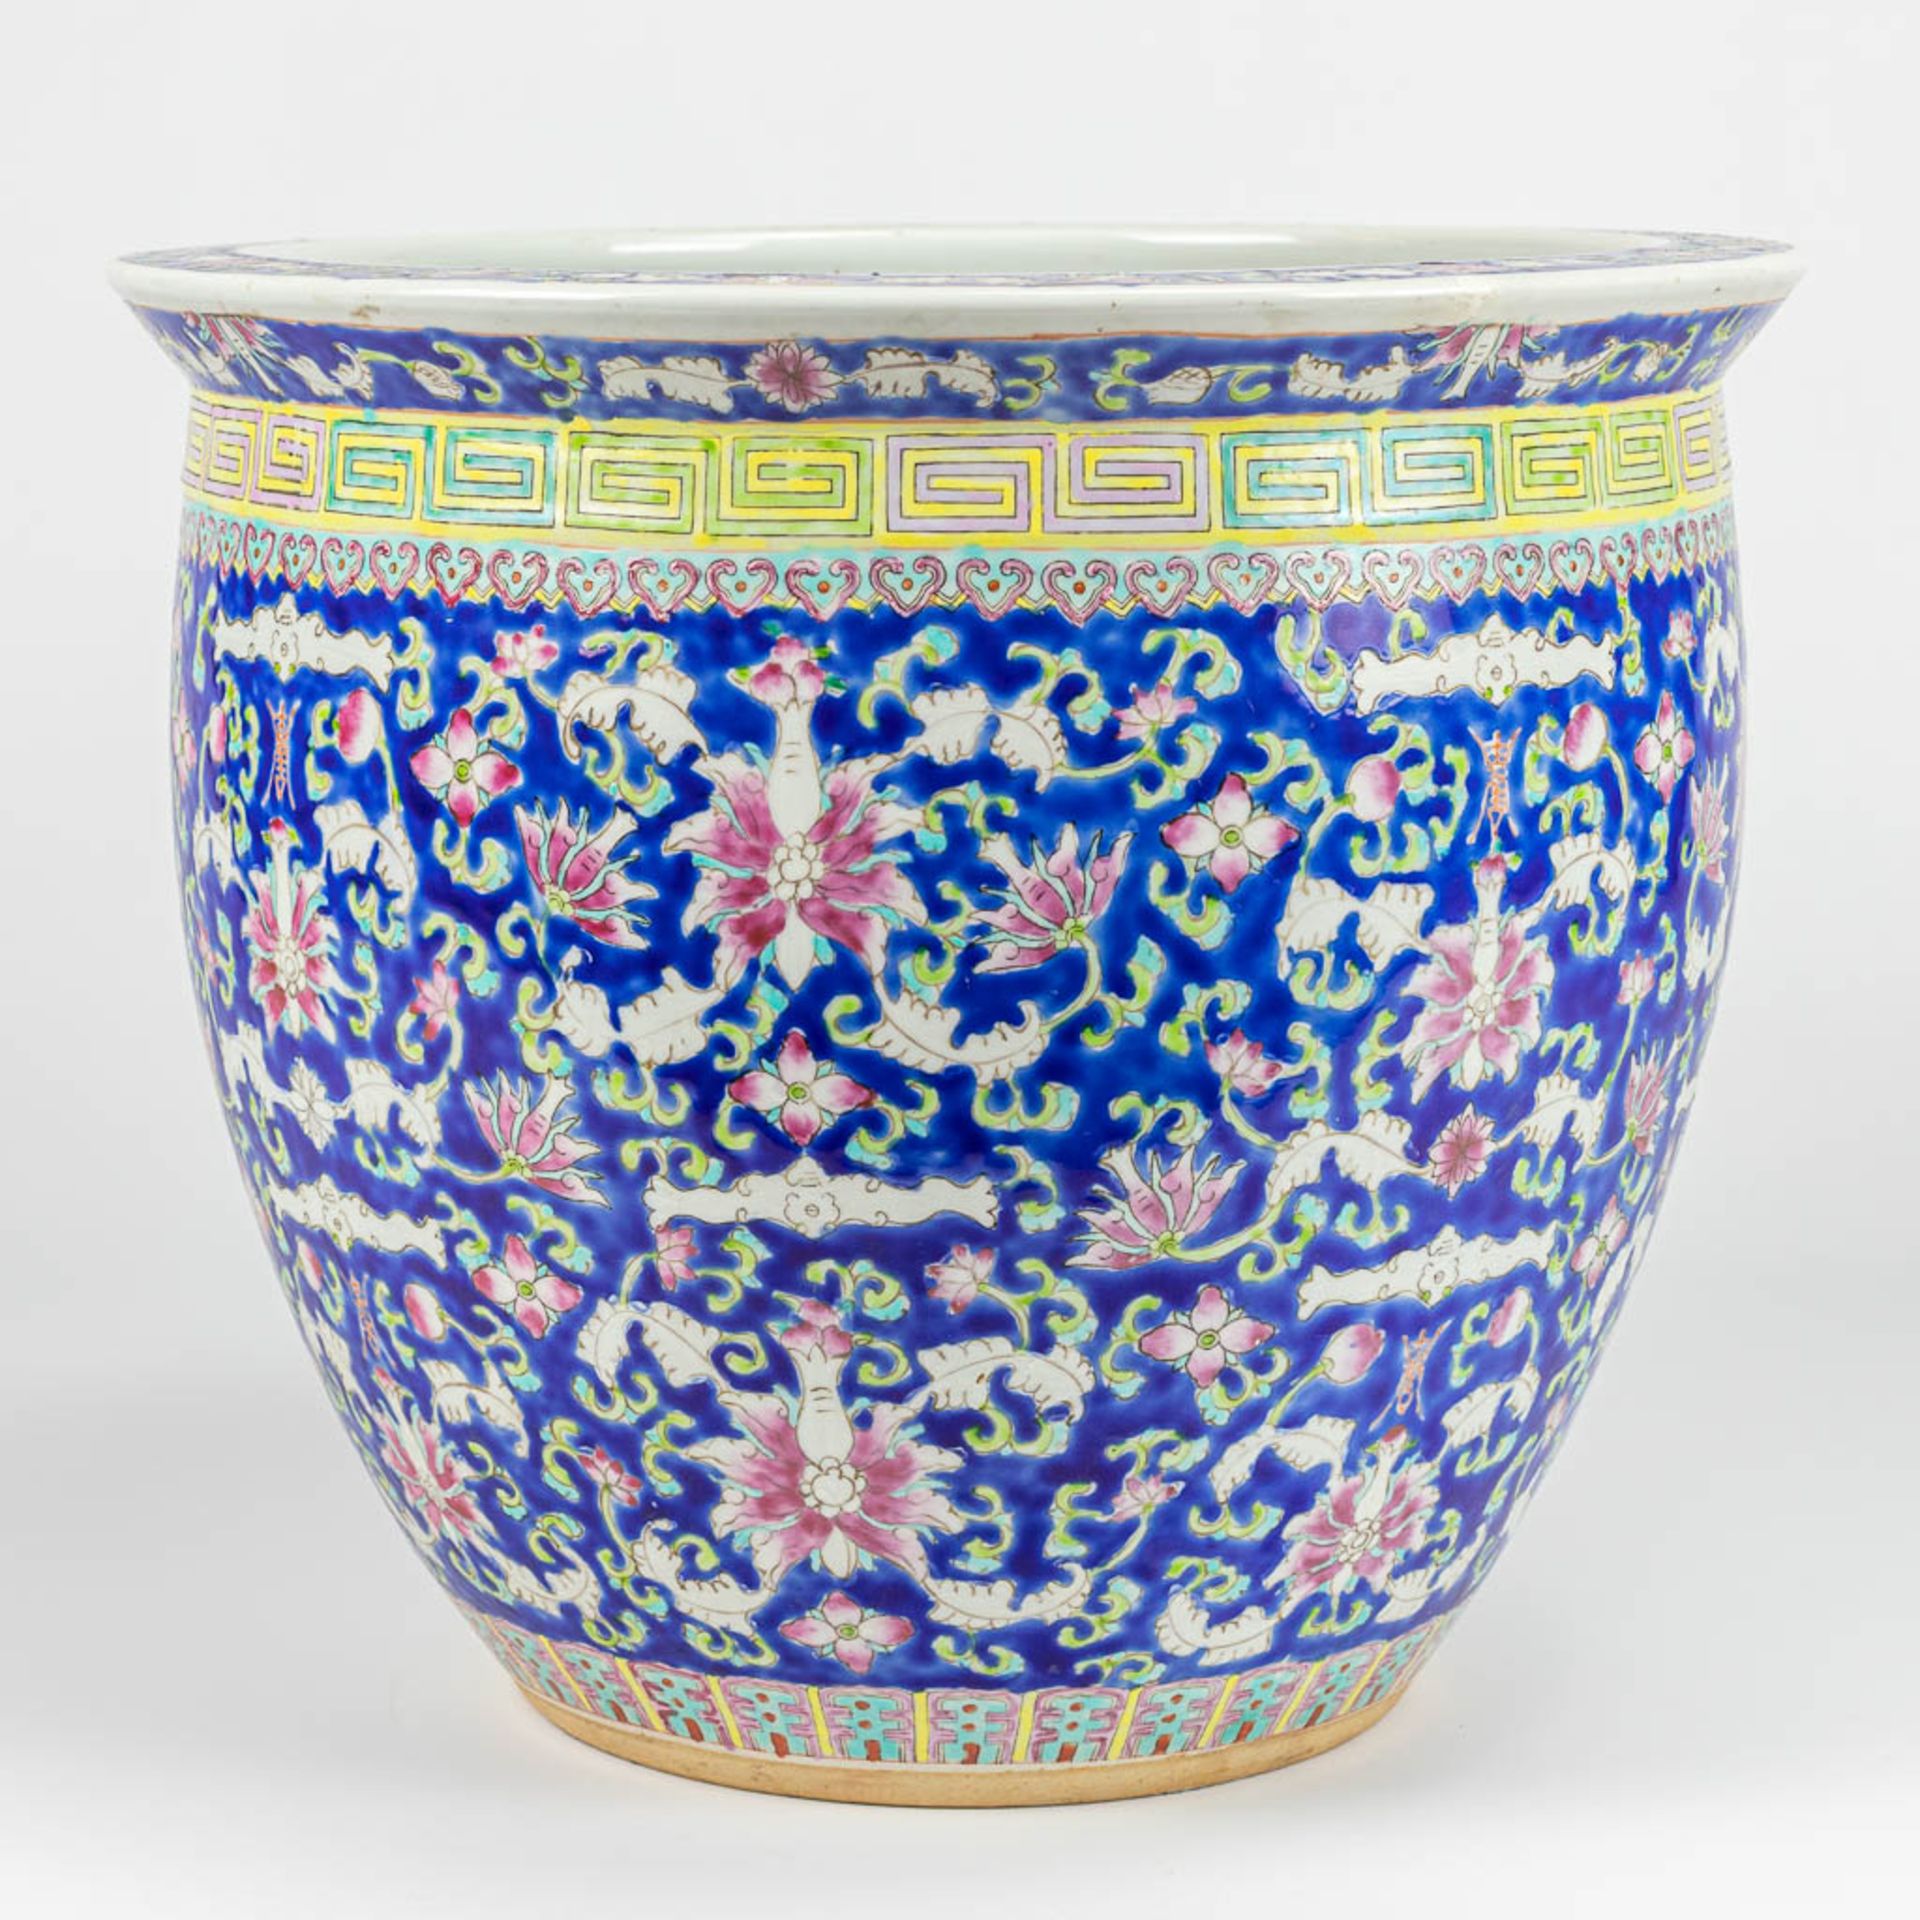 A large cache-pot made of Chinese porcelain and decorated with flowers